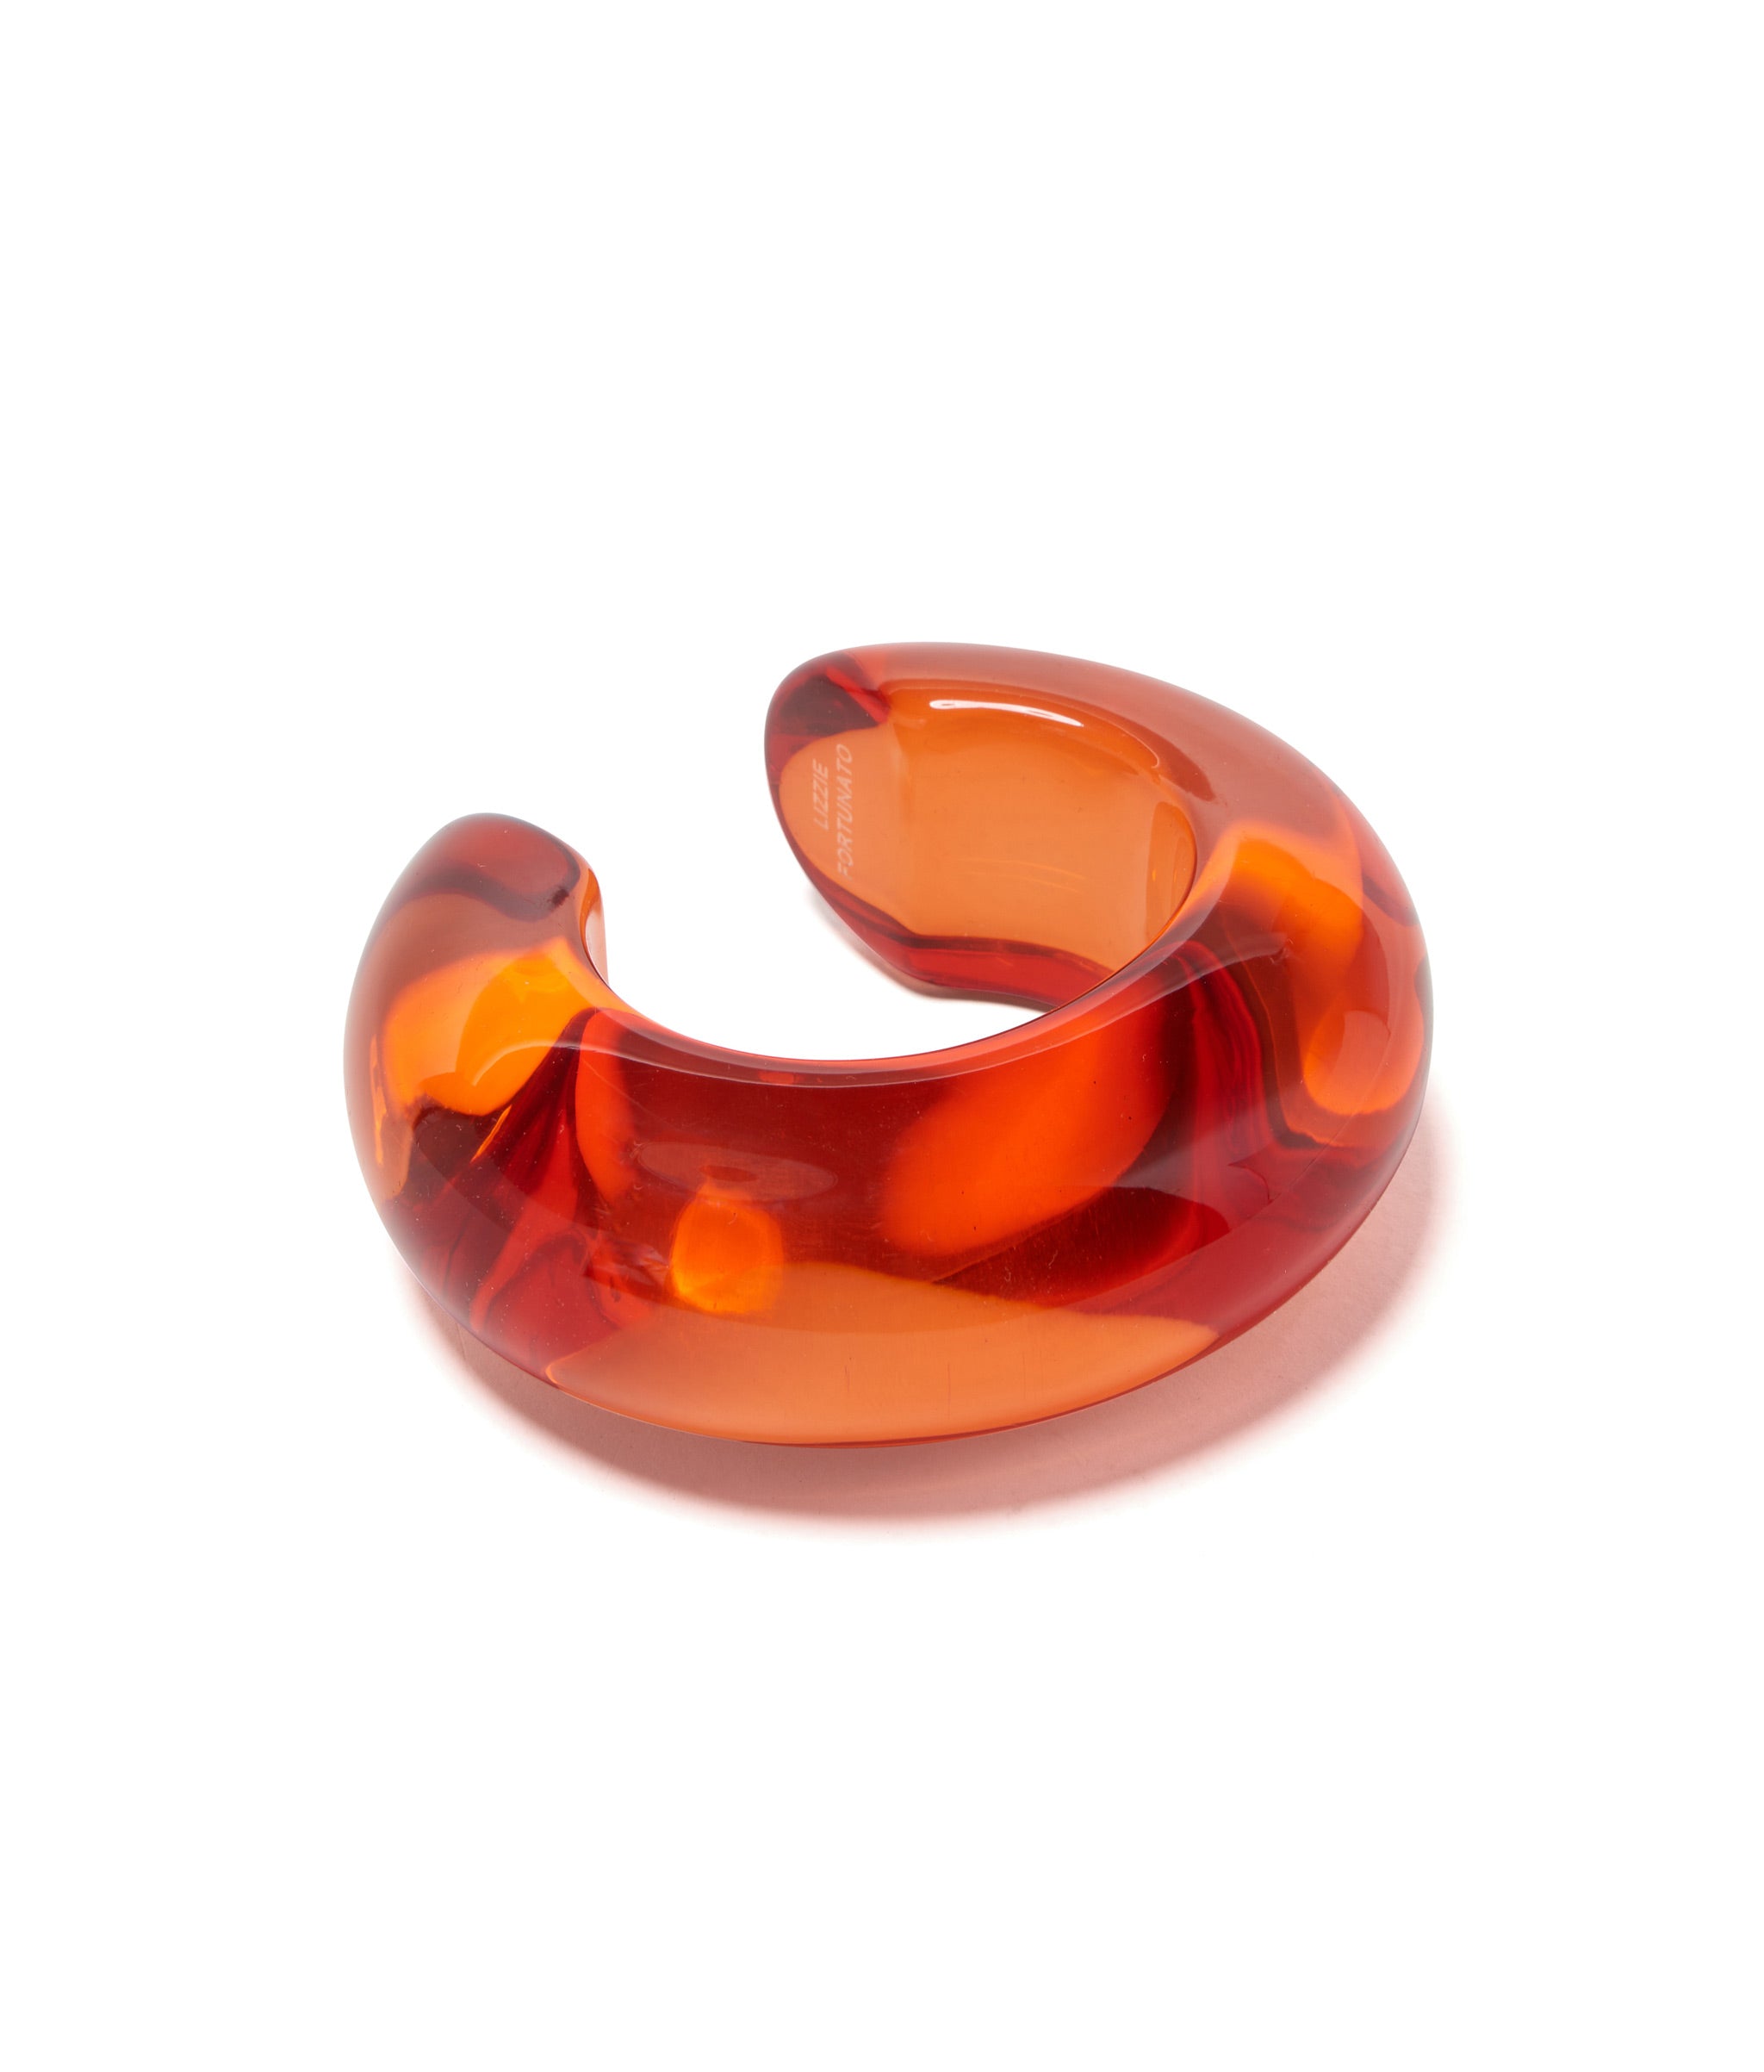 Arc Cuff in Persimmon. Chunky bracelet made of orange-hued resin.